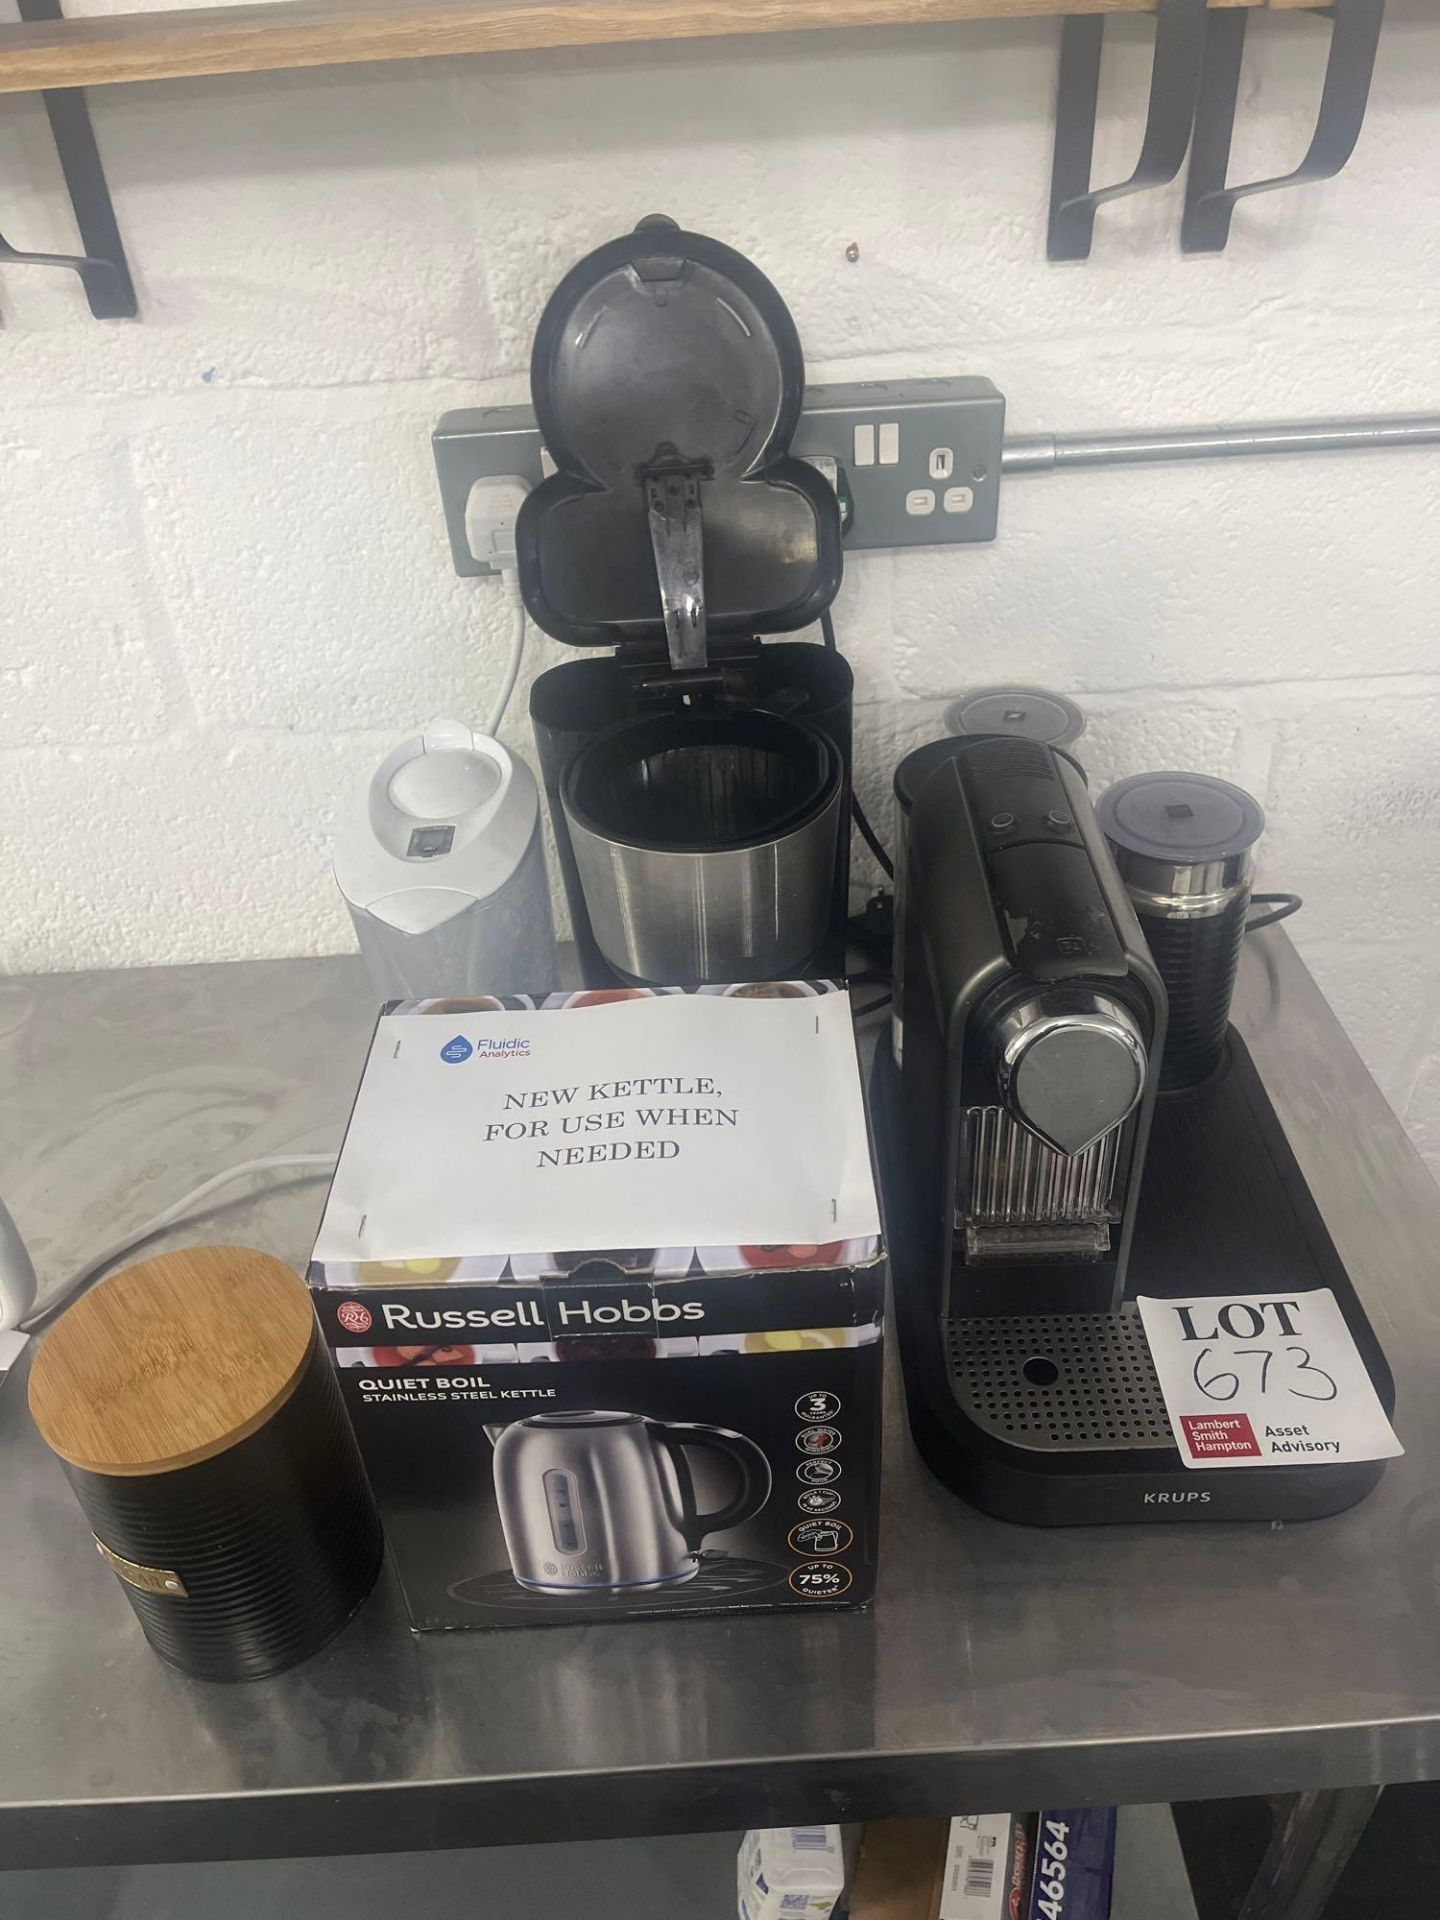 Krups coffee machine, Russell Hobbs stainless steel kettle etc. (as lotted)